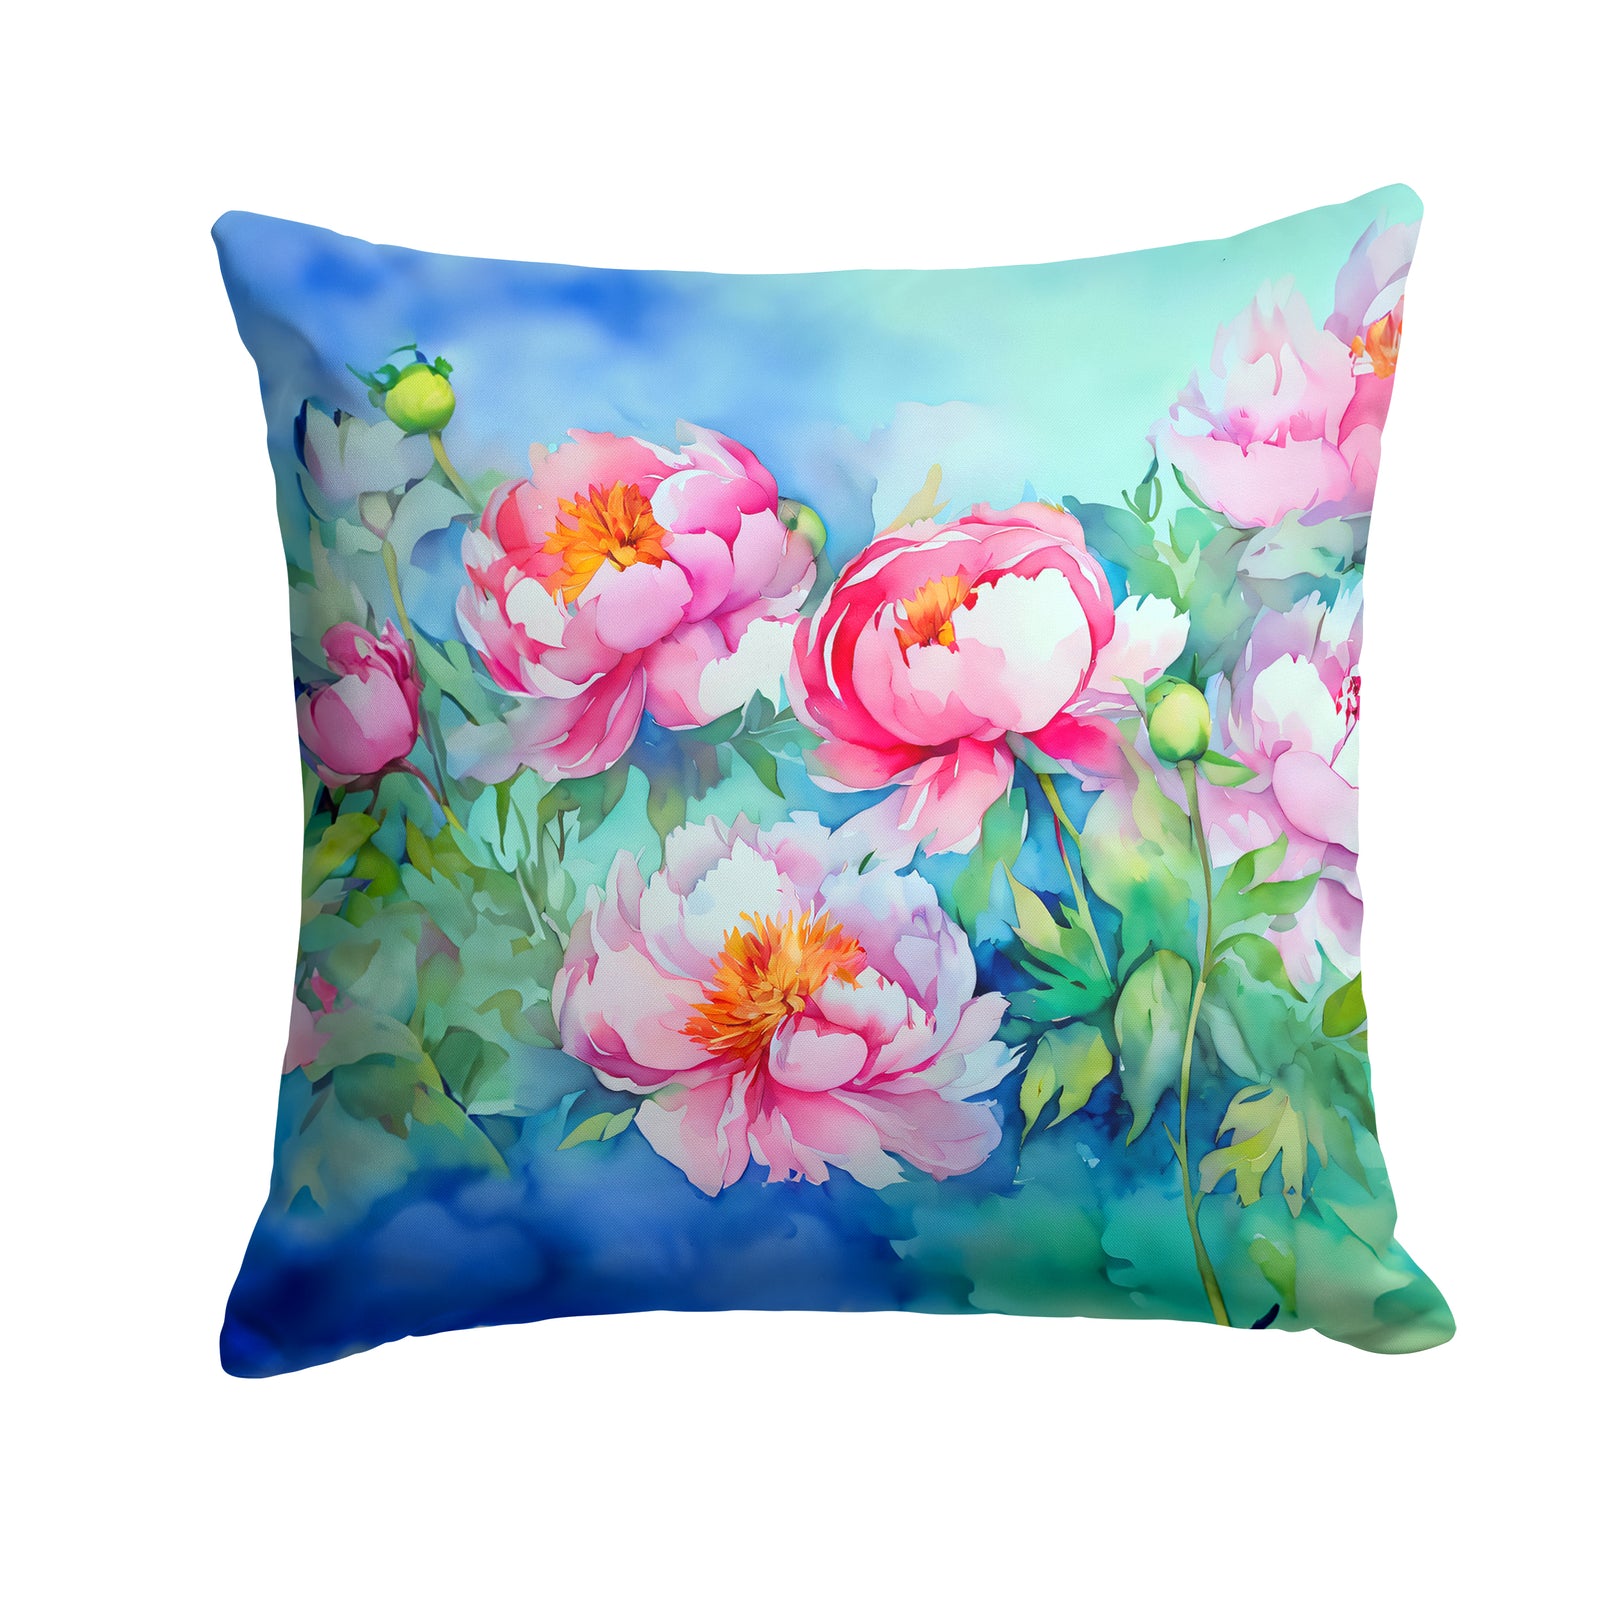 Buy this Peonies in Watercolor Throw Pillow